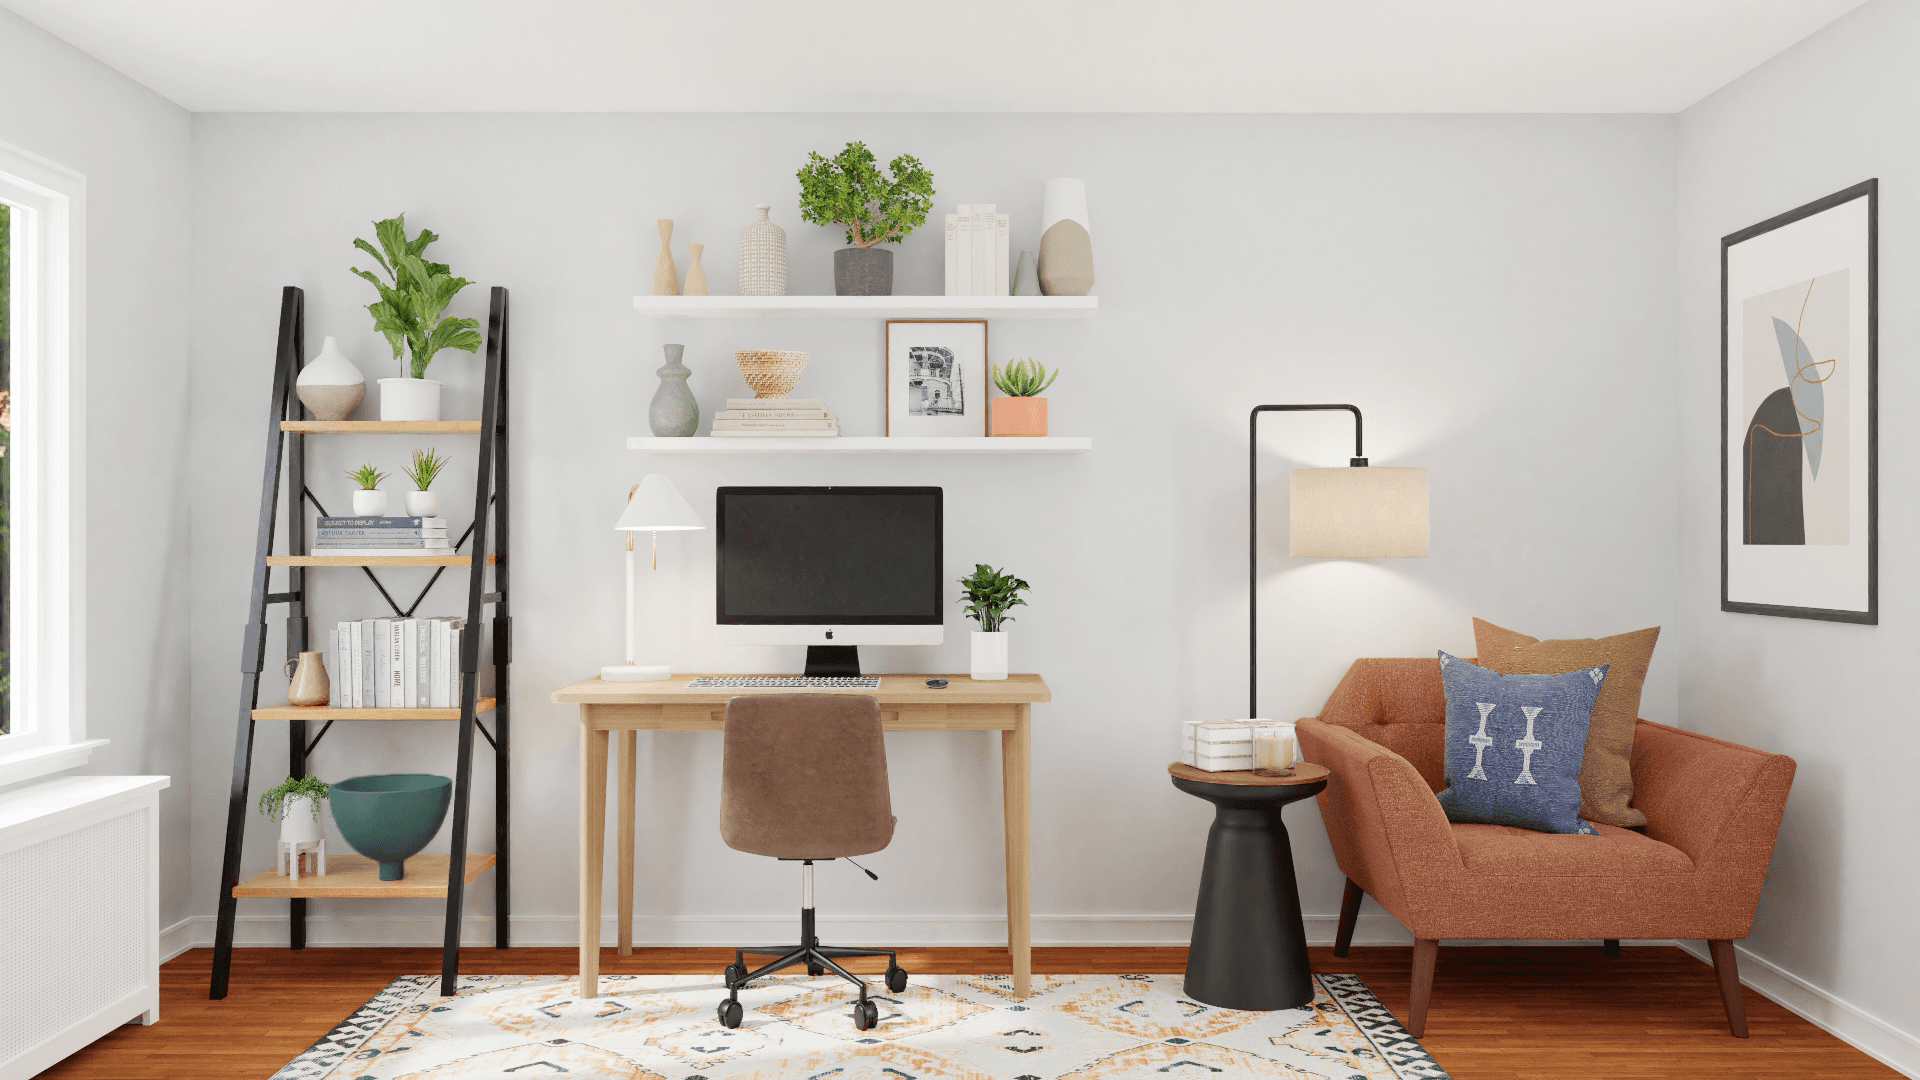 Succulents Add Beauty To This Mid-Century Home Office